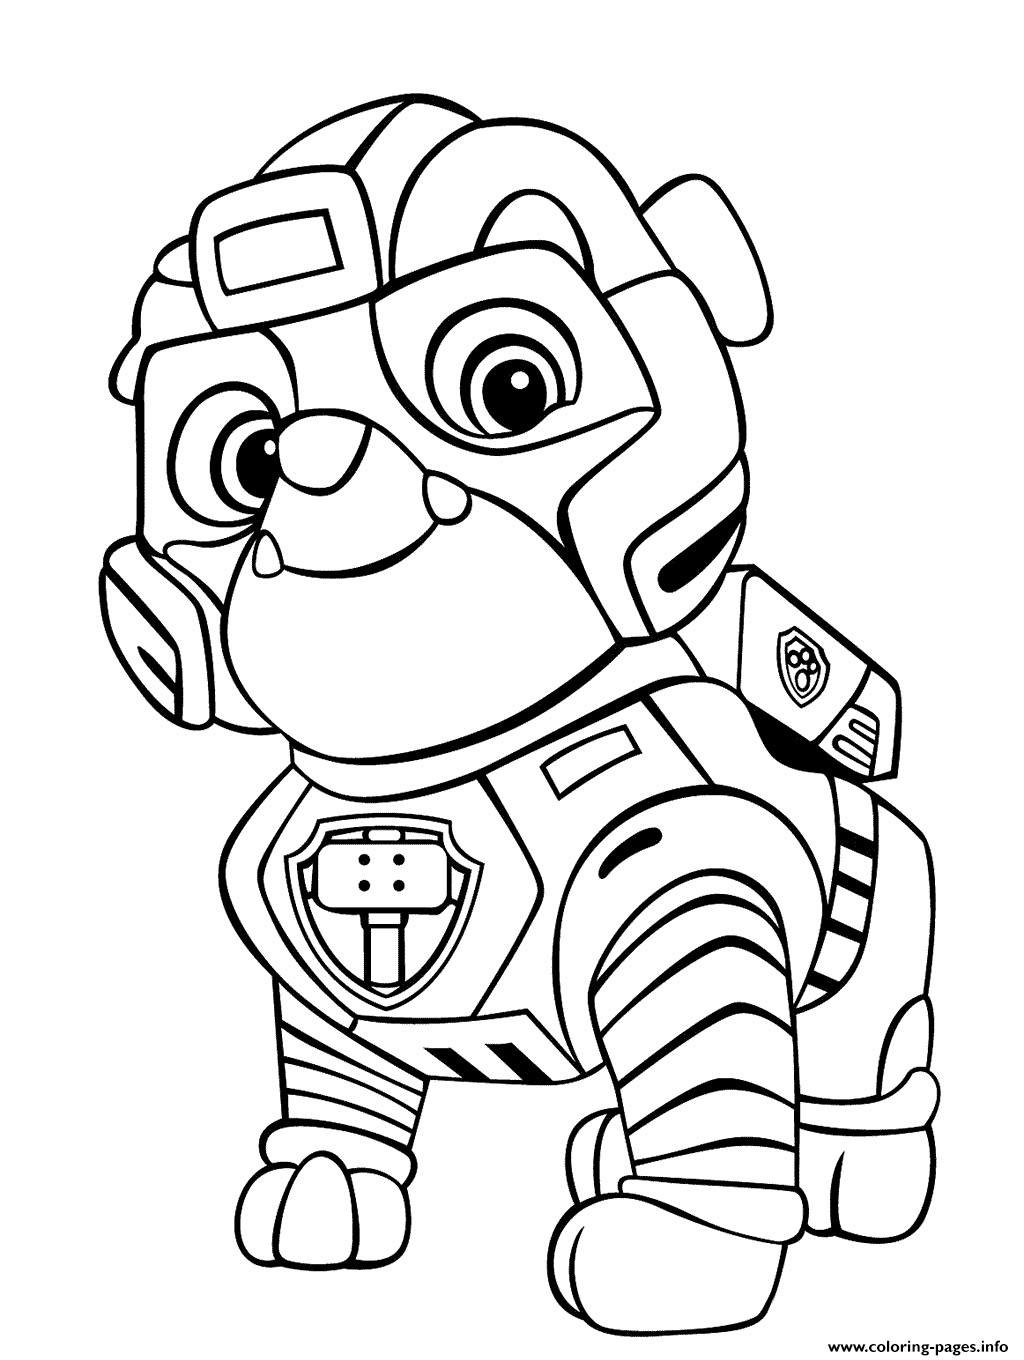 Paw Patrol Coloring Pages FREE Printable 117